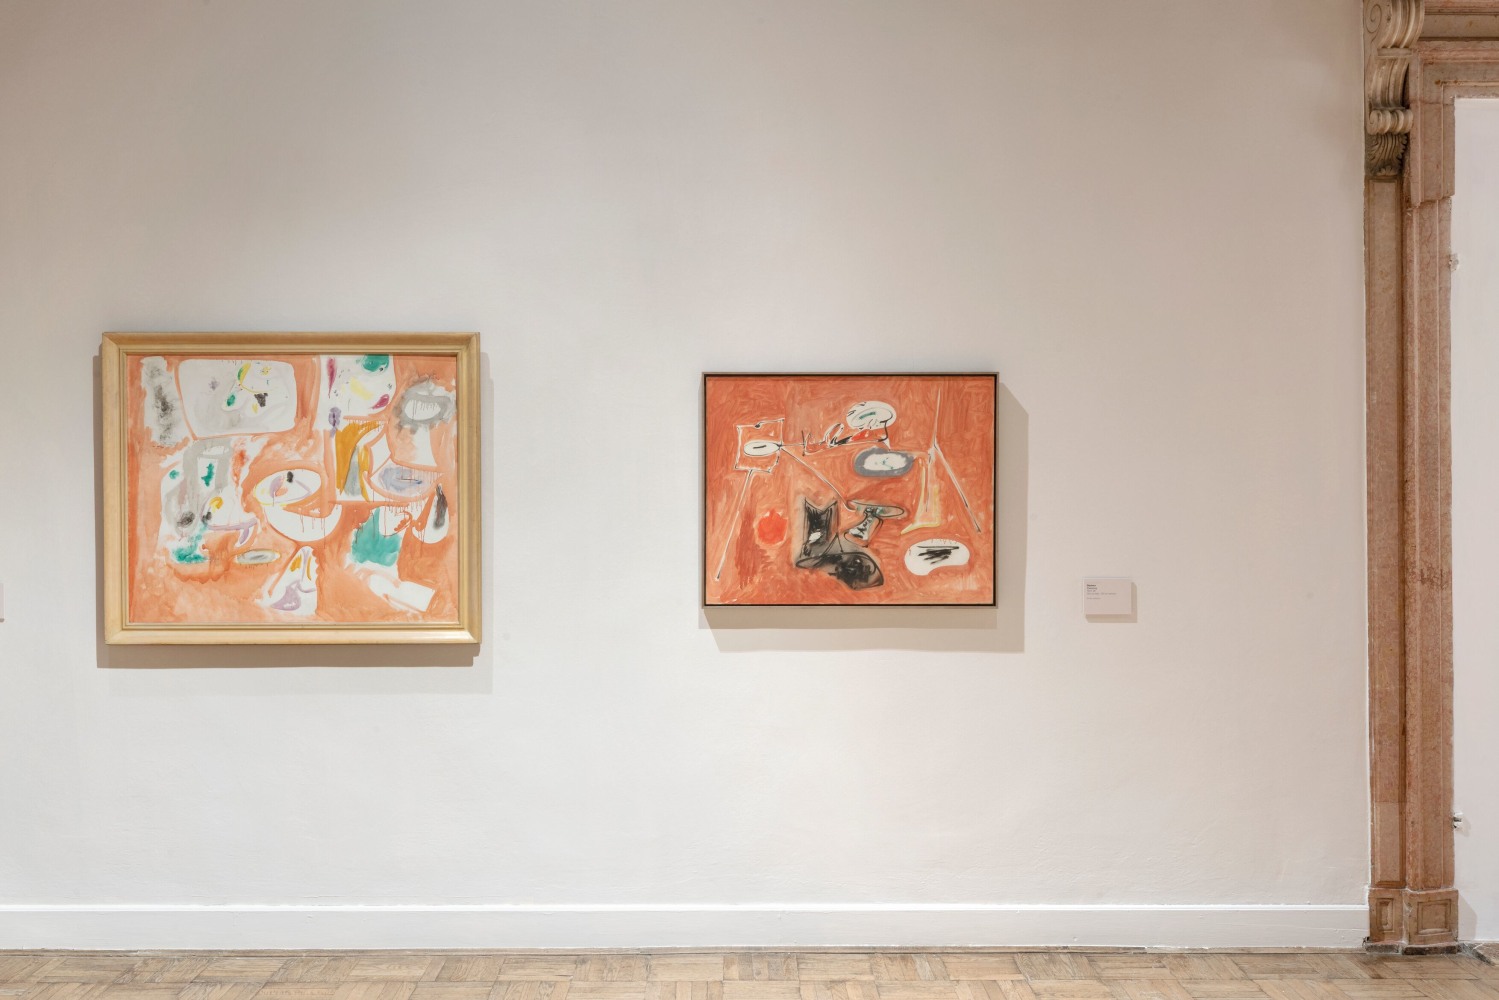 Installation photograph showing two works by Gorky: Anti-Medusa and Untitled (Last Painting)